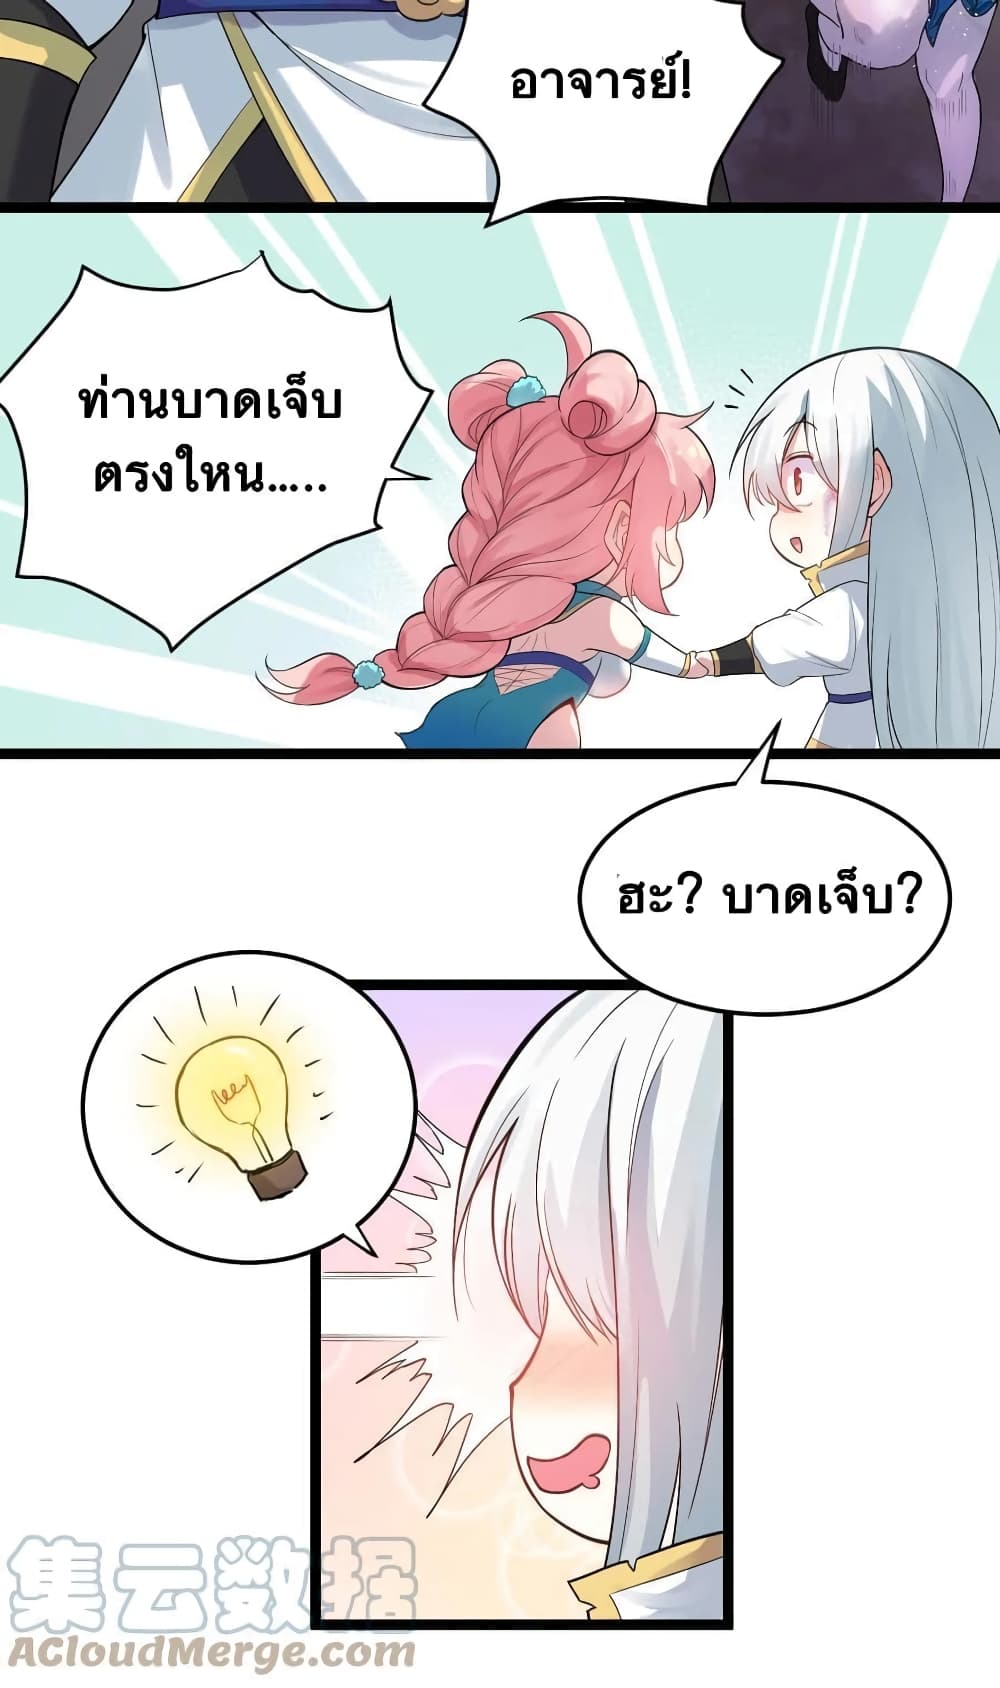 Godsian Masian from Another World ตอนที่ 91 (37)